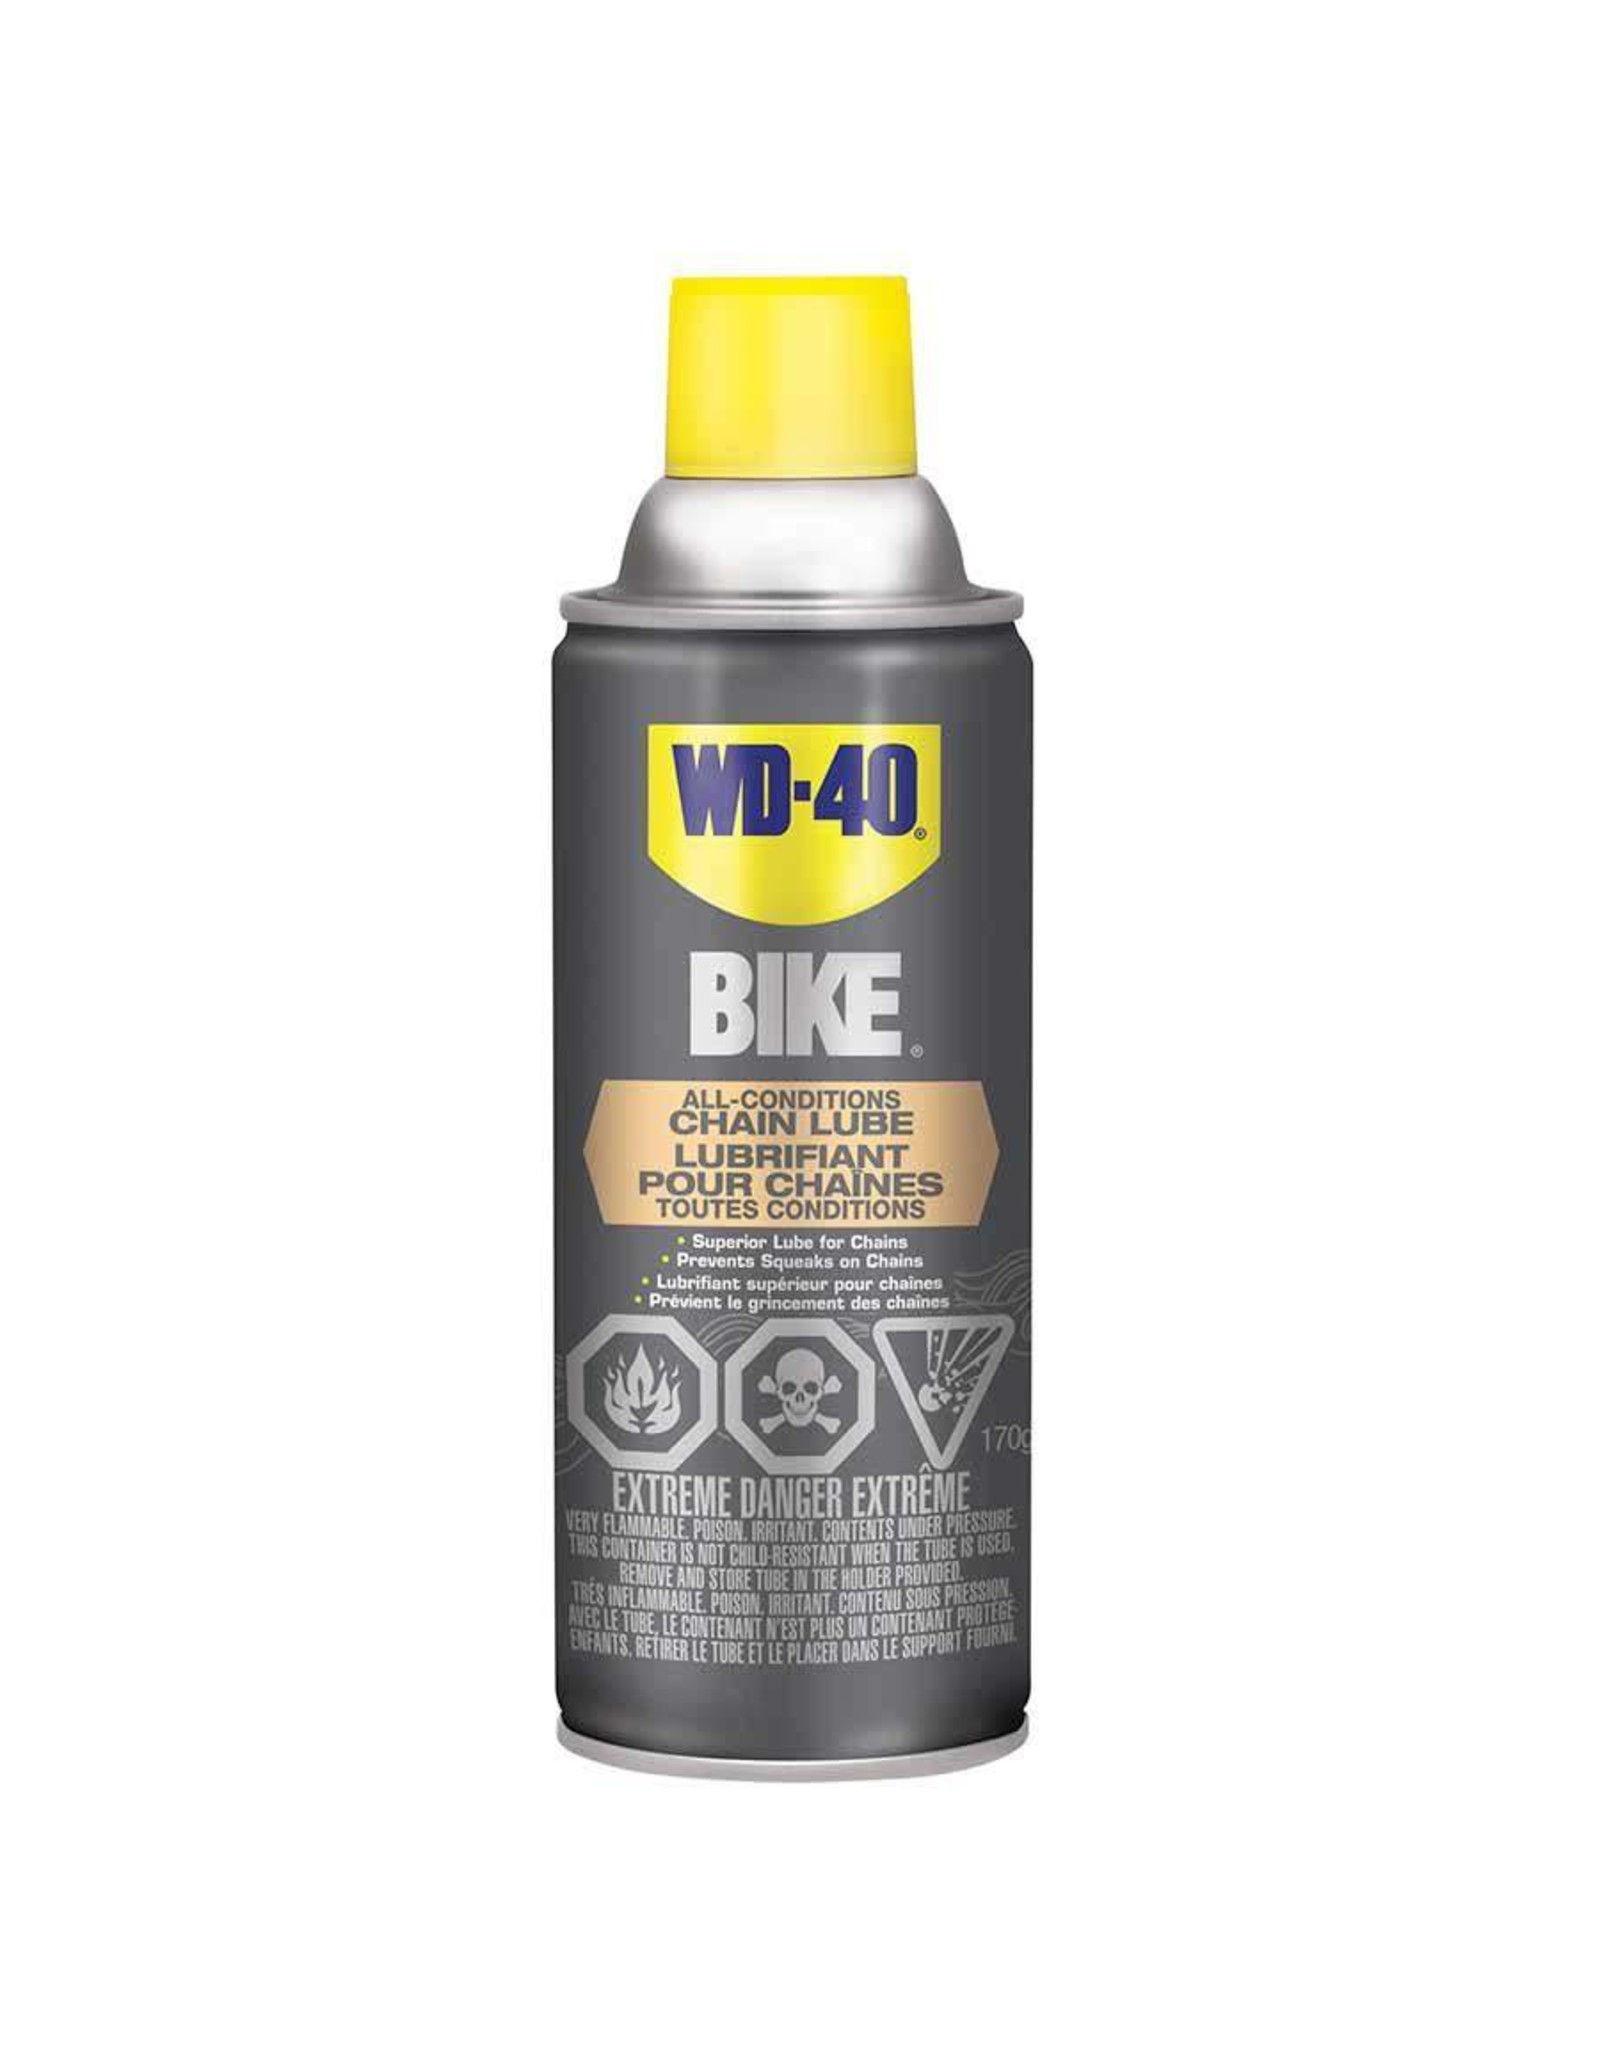 WD-40 Bike Lubricant All Conditions